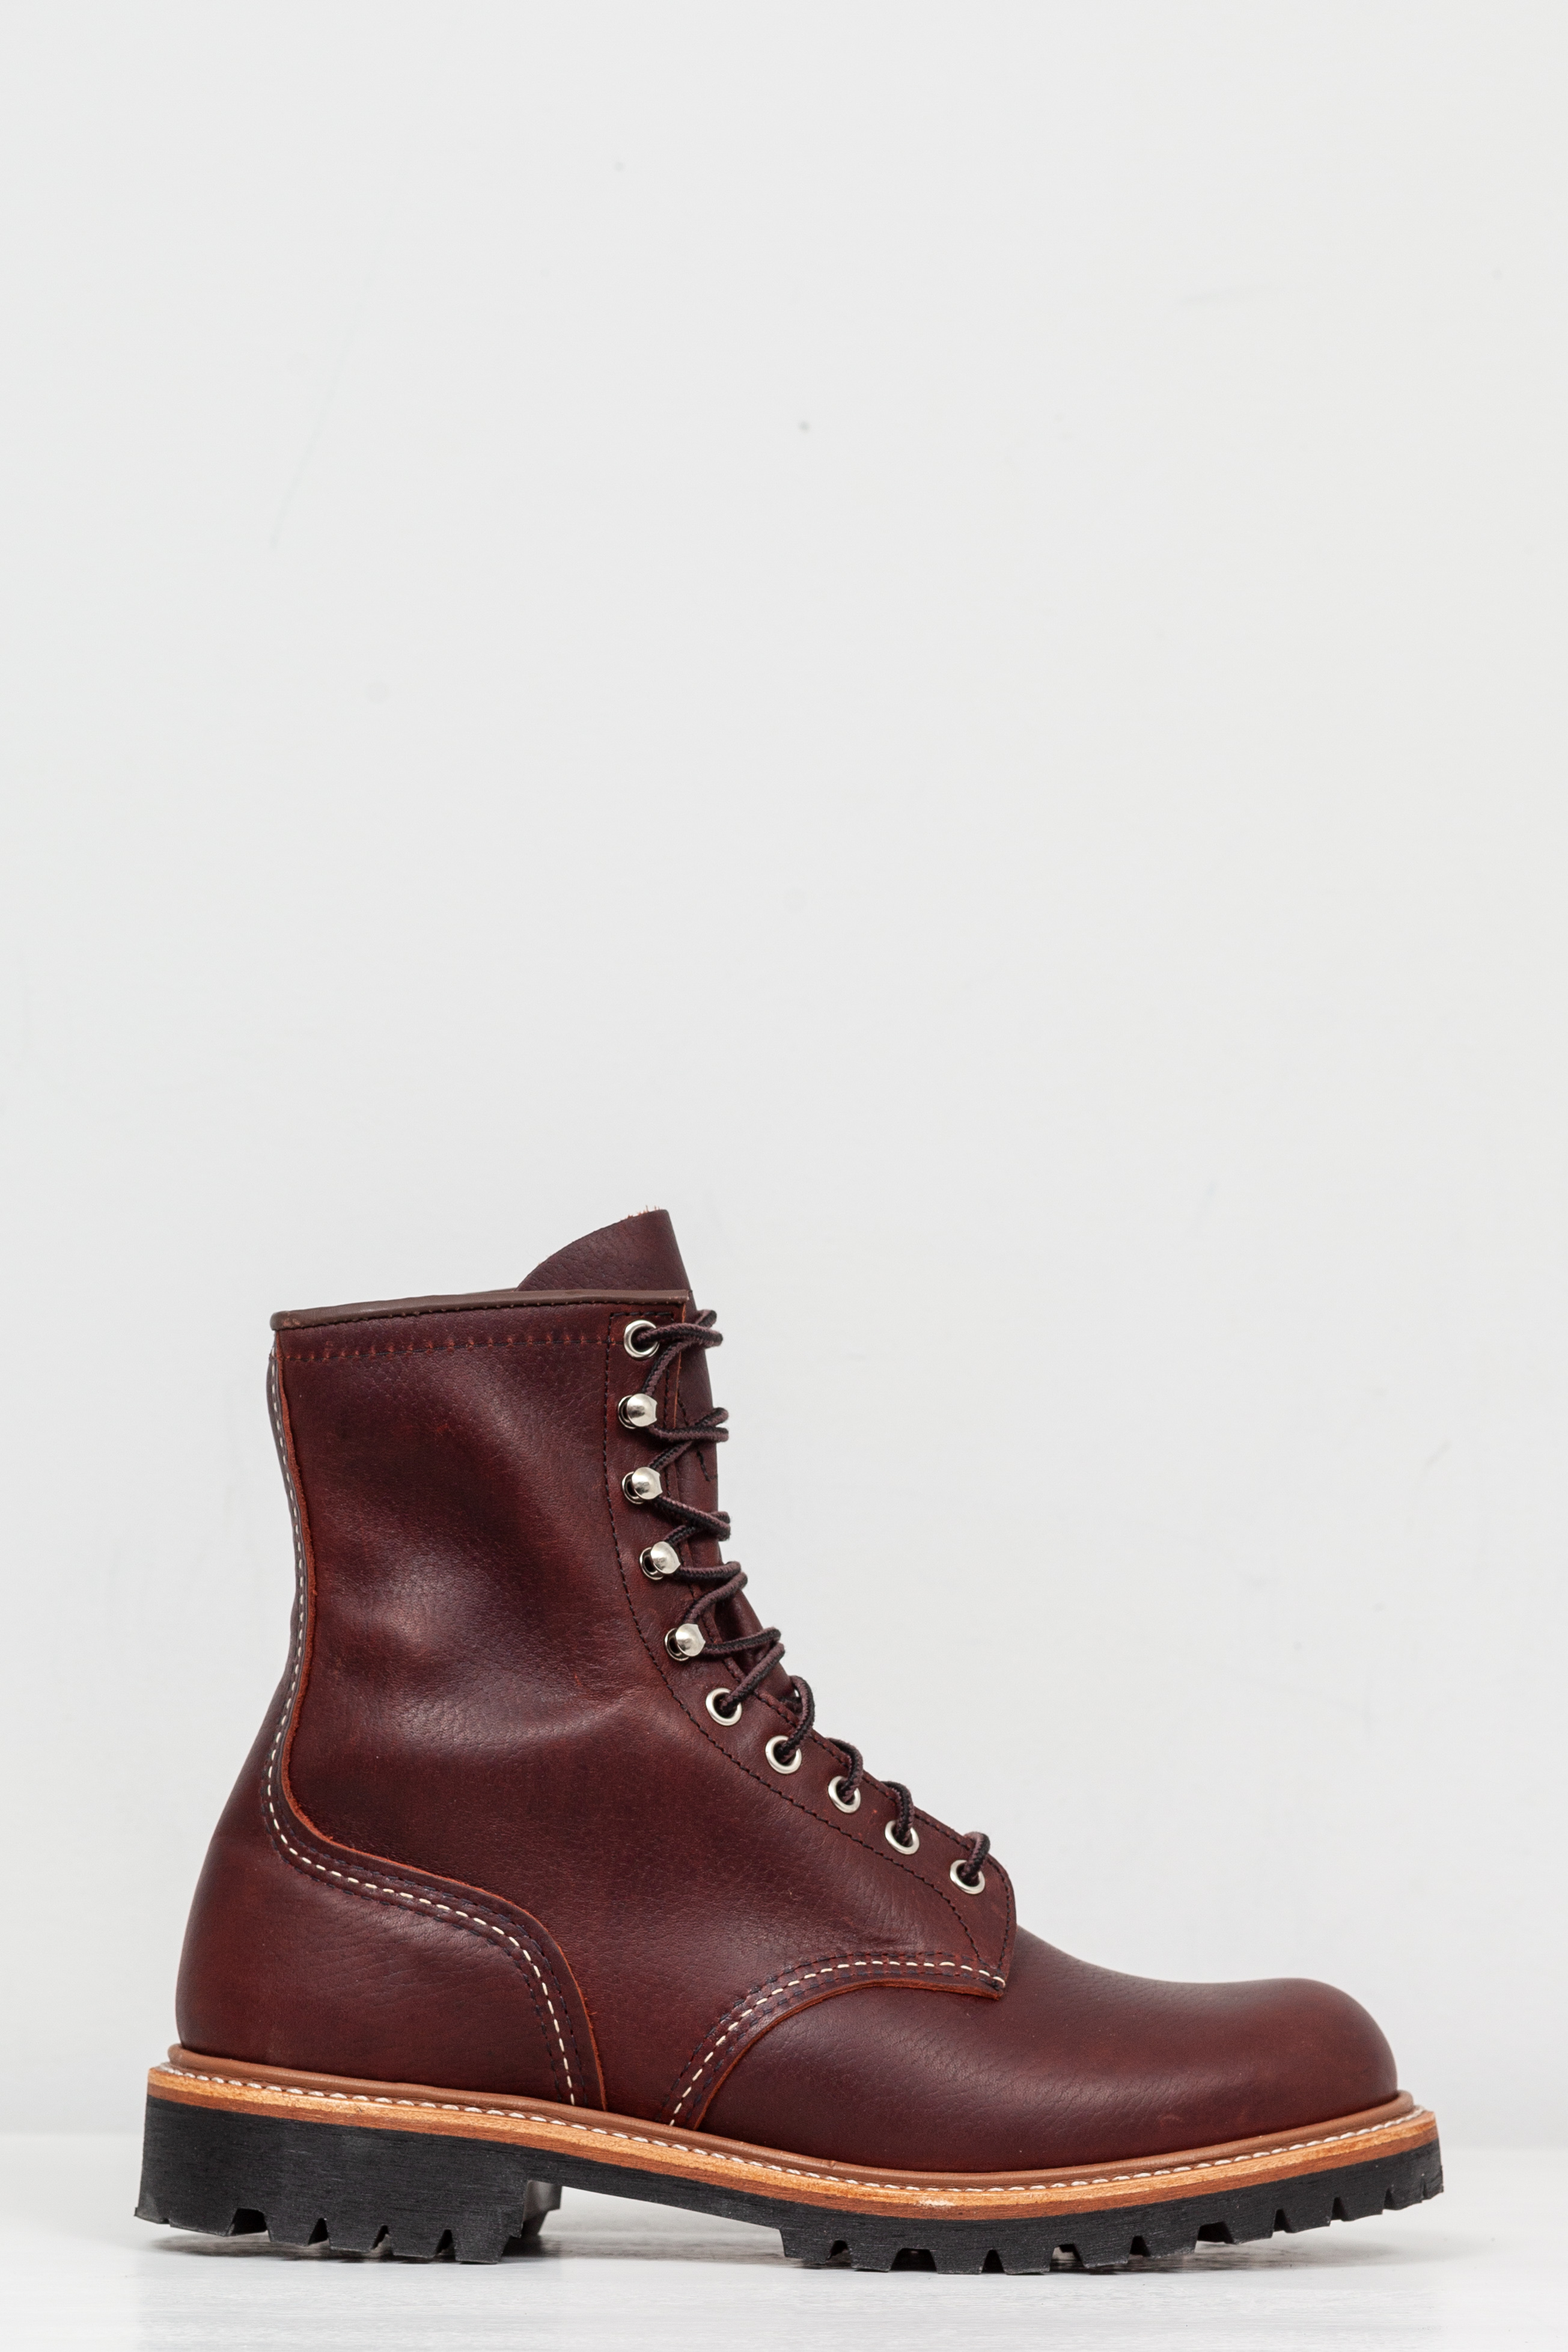 red wing logger max